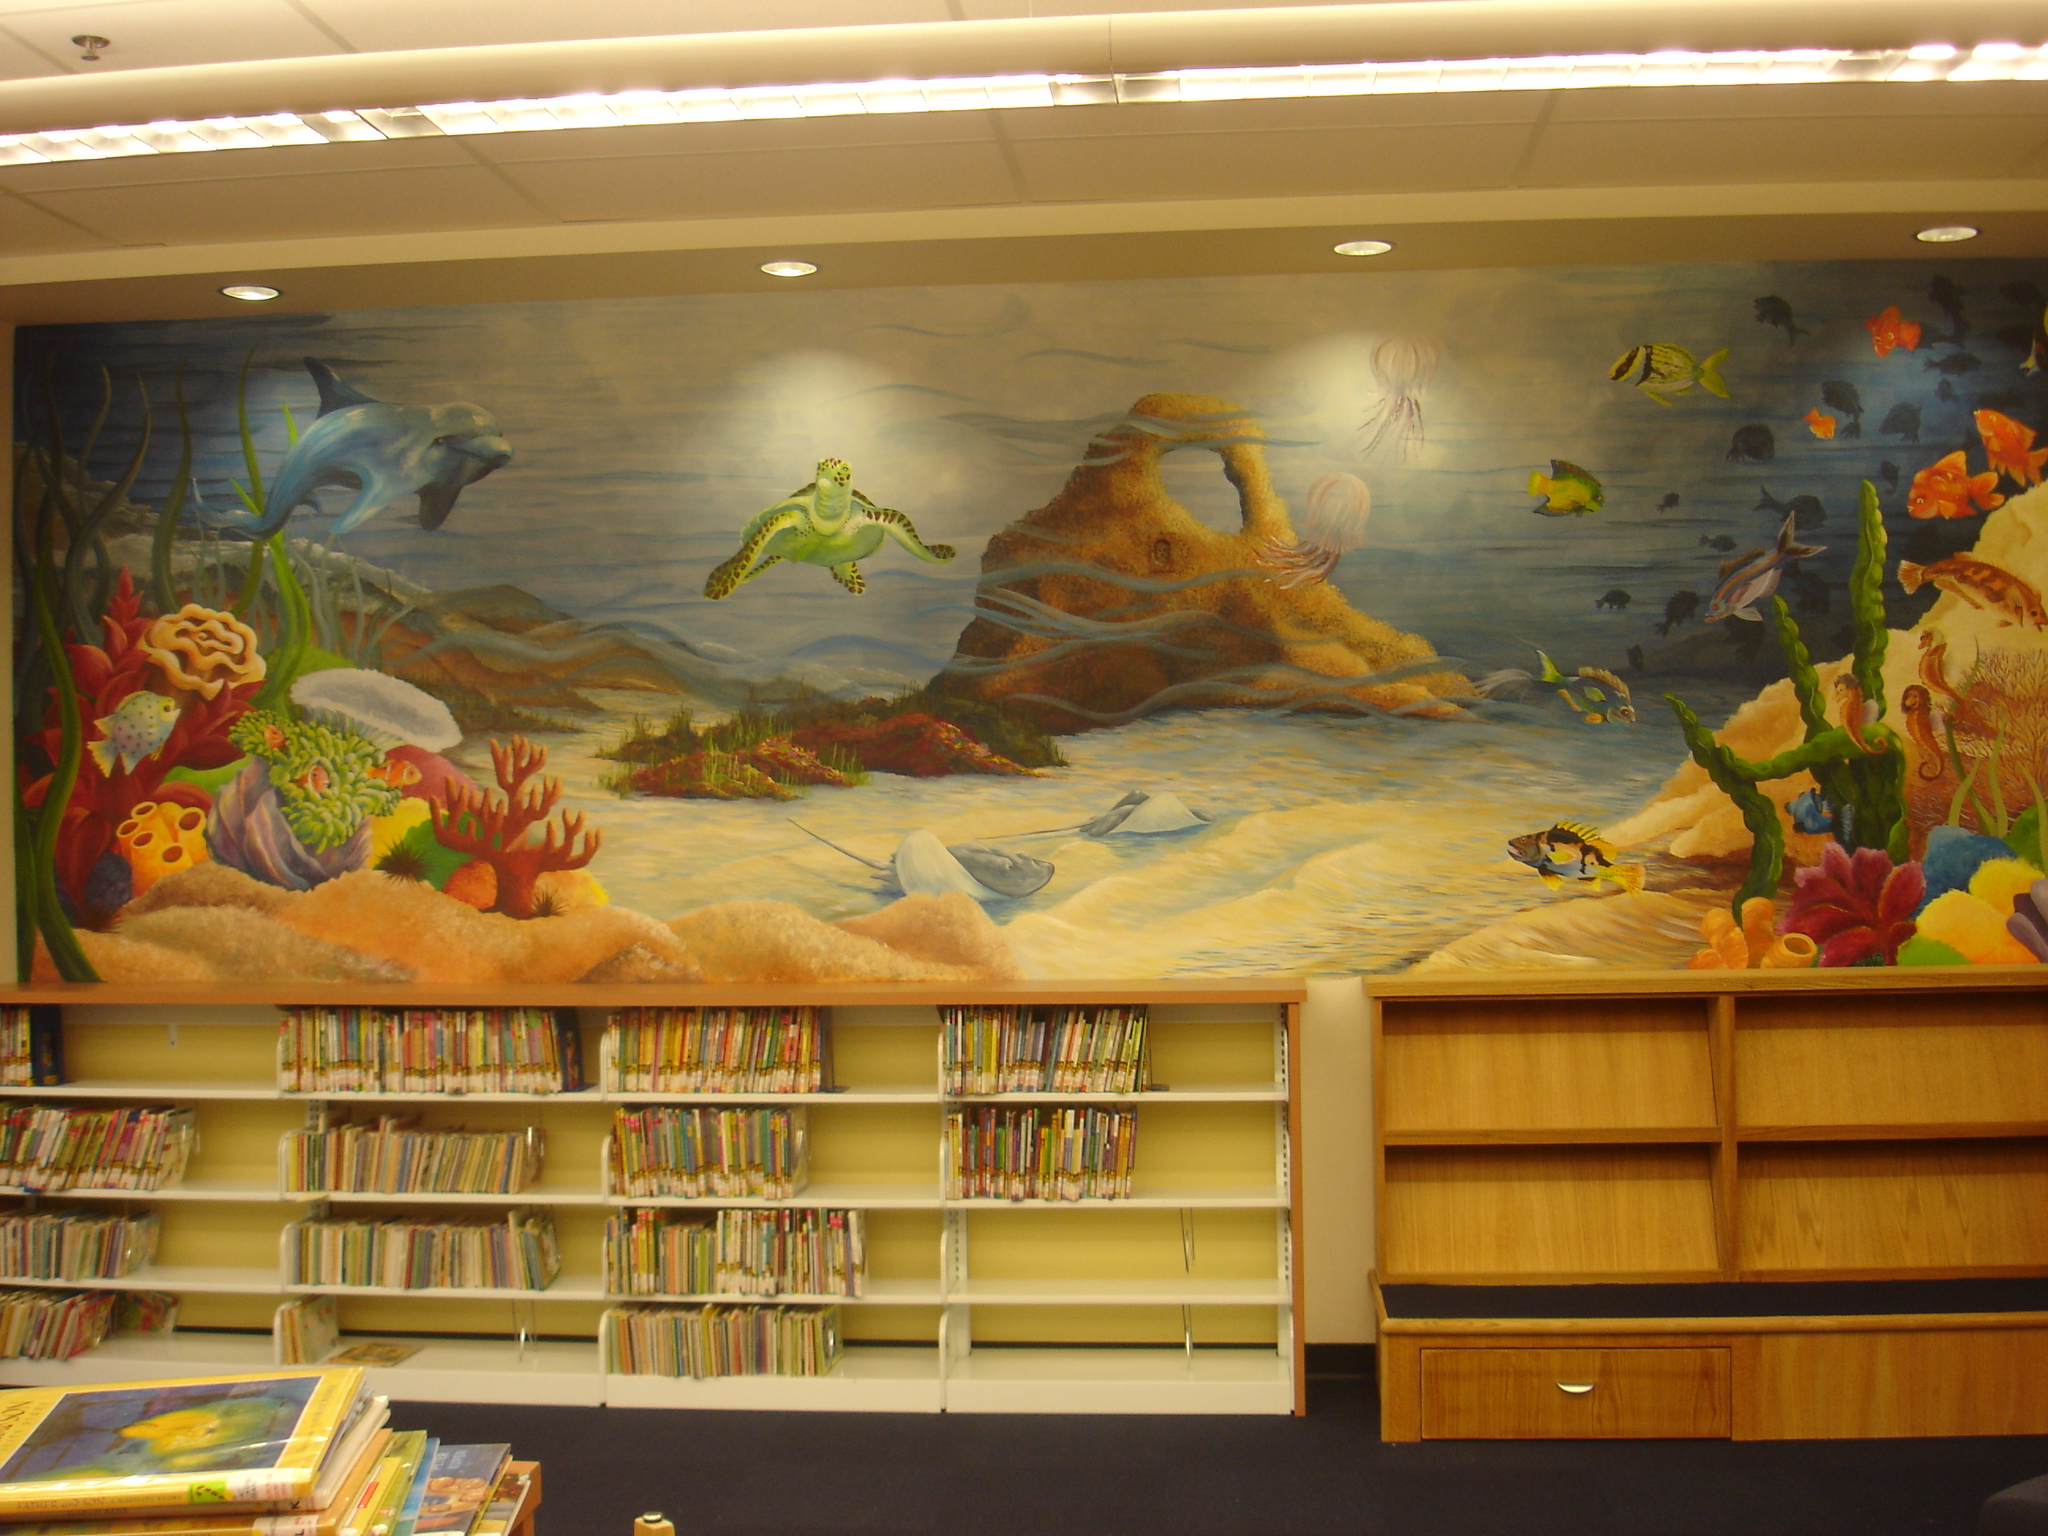 Mural in Children's section of library